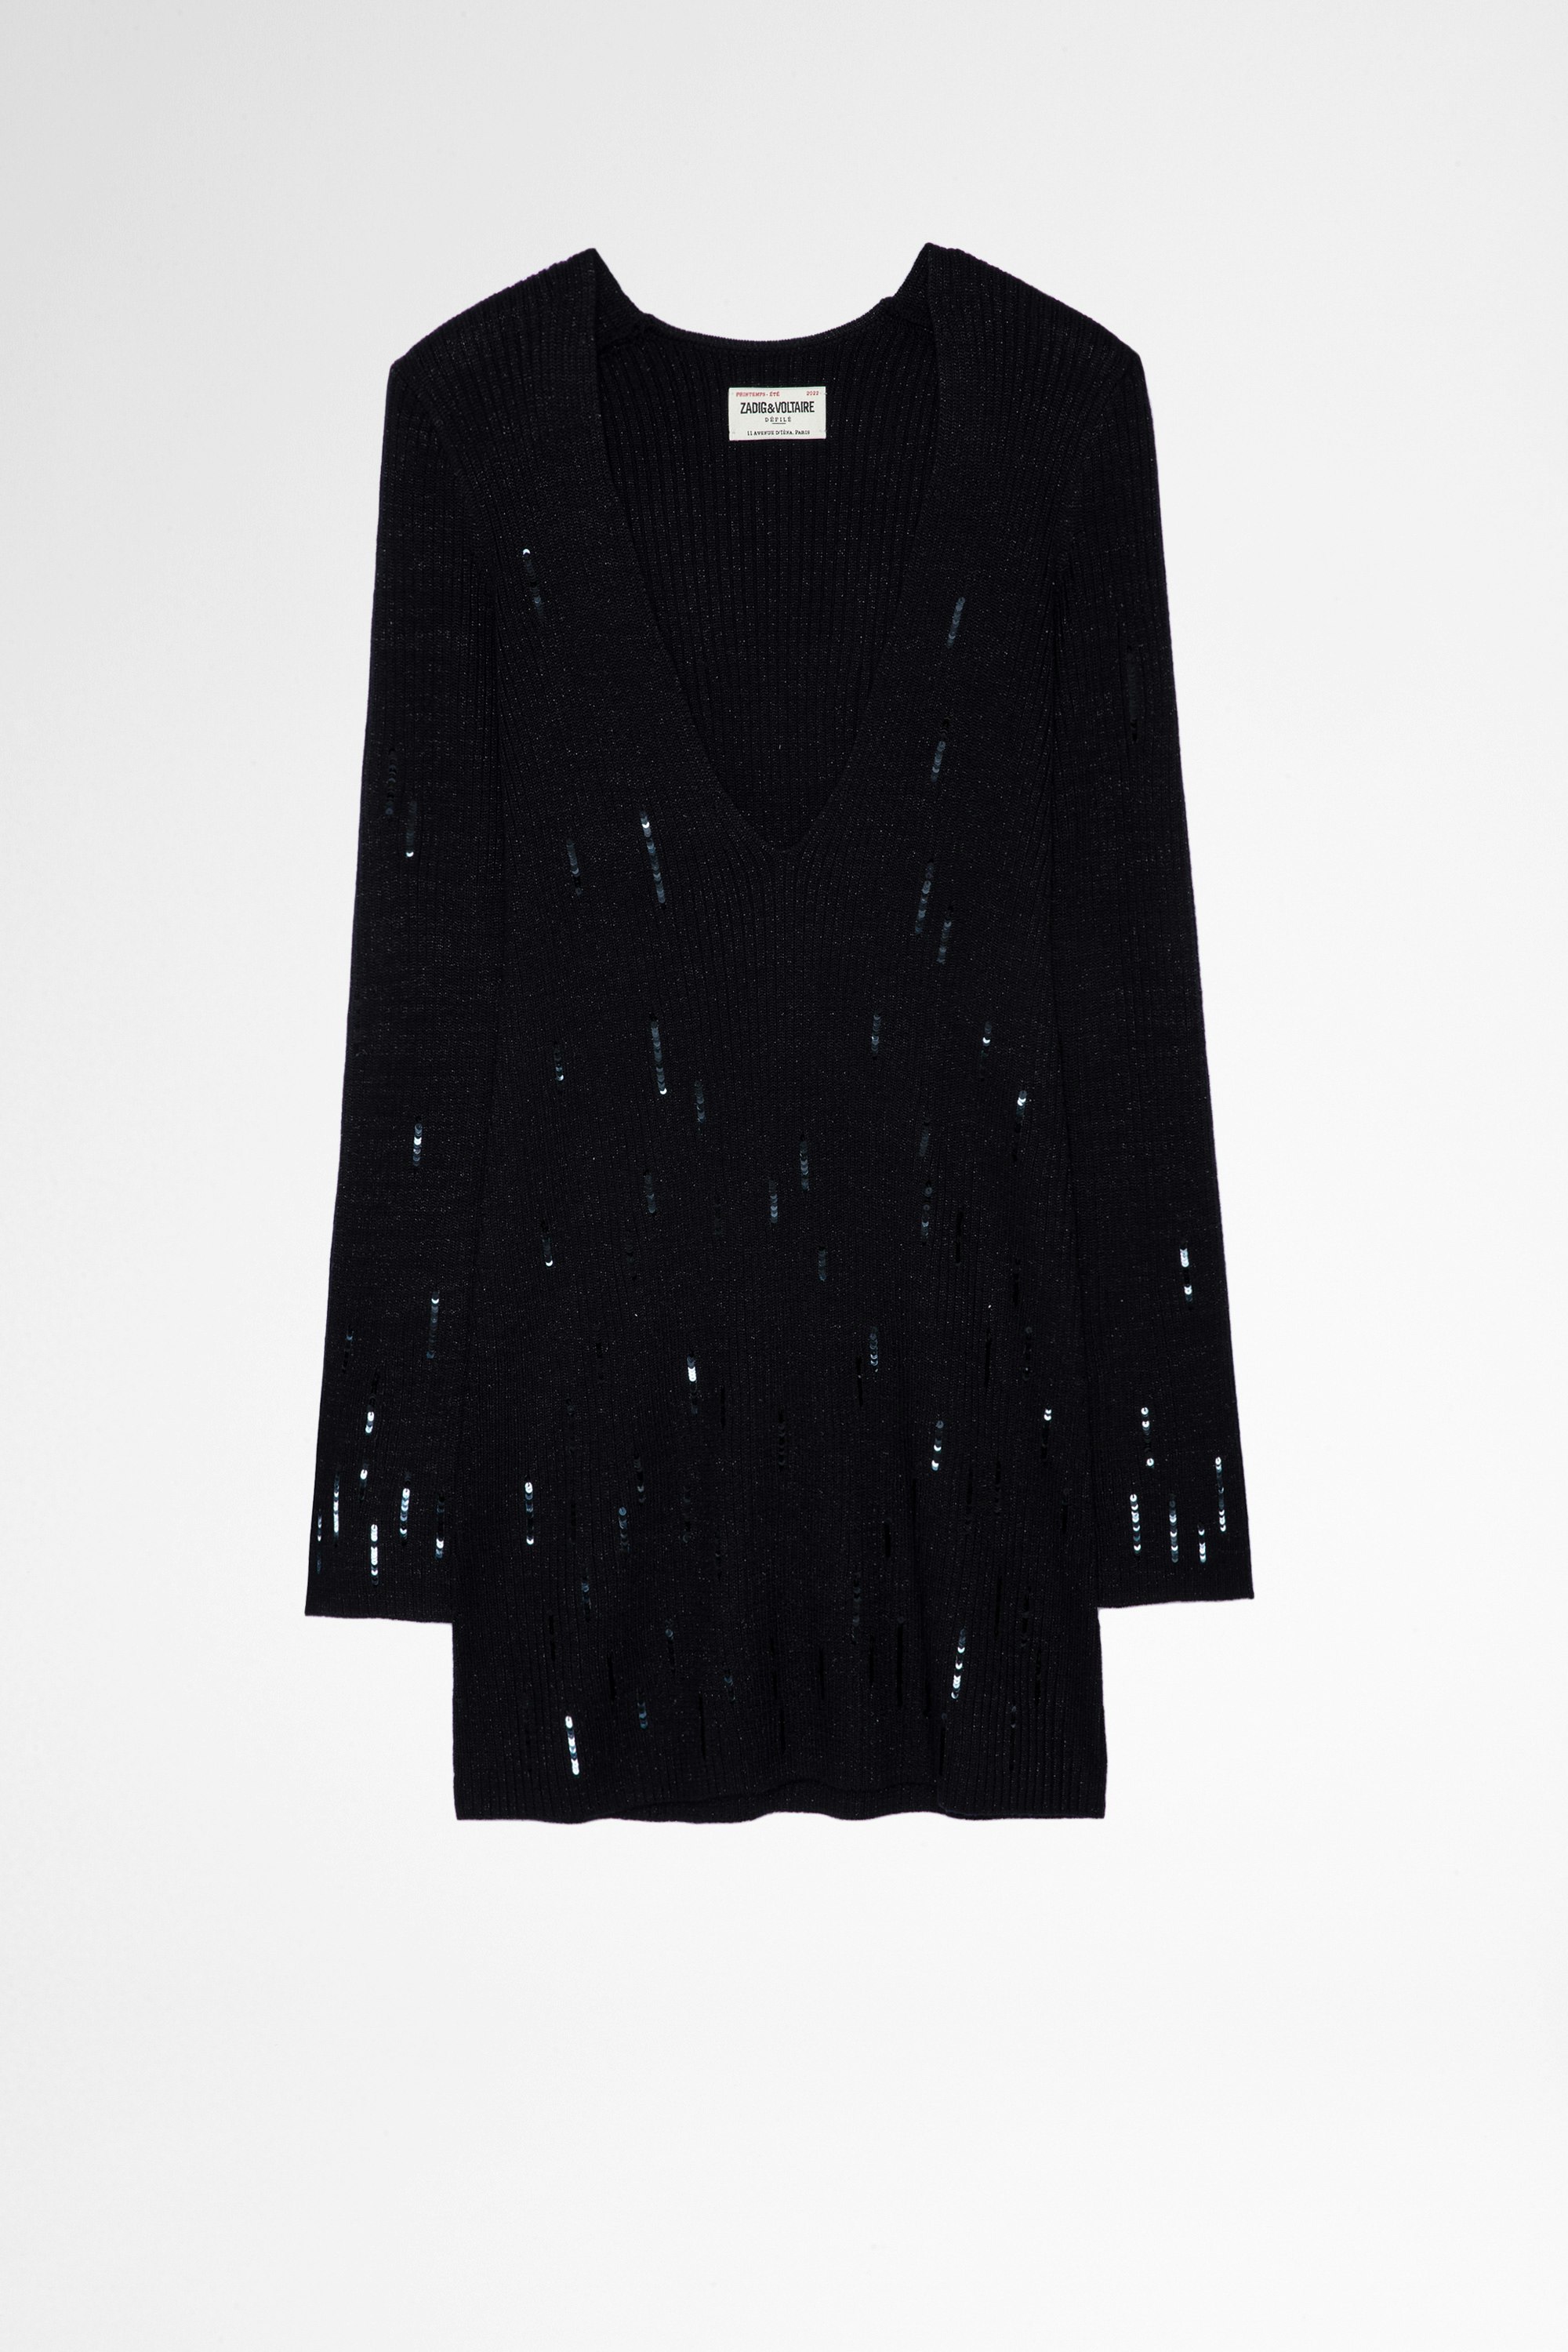 Jenna ドレス Women's navy blue knitted sweater dress with sequins